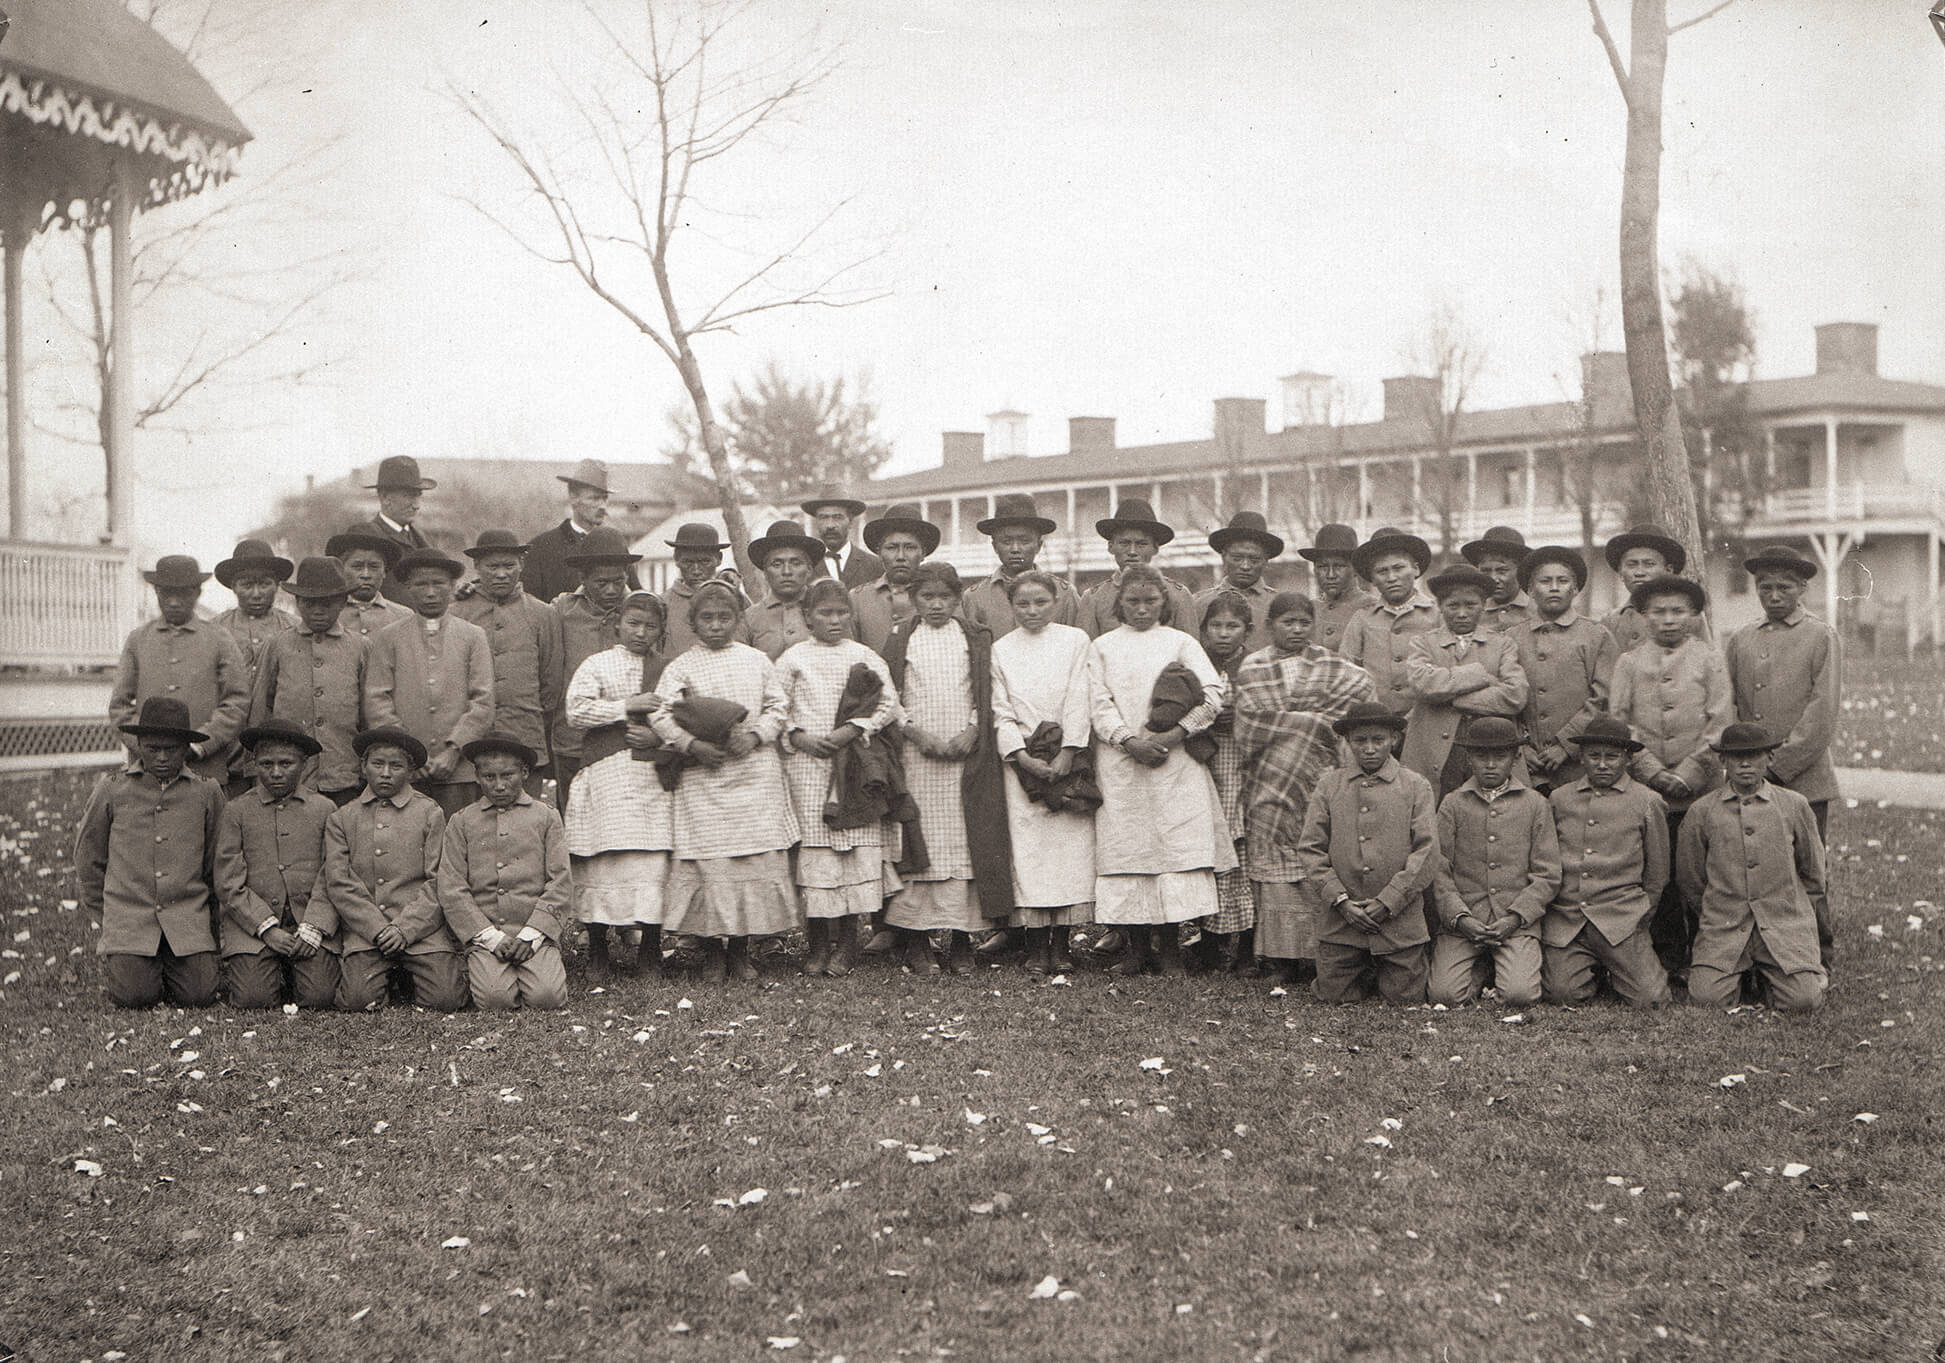 Group of Native American children in posed in Western clothing. Three white men stand behind them.